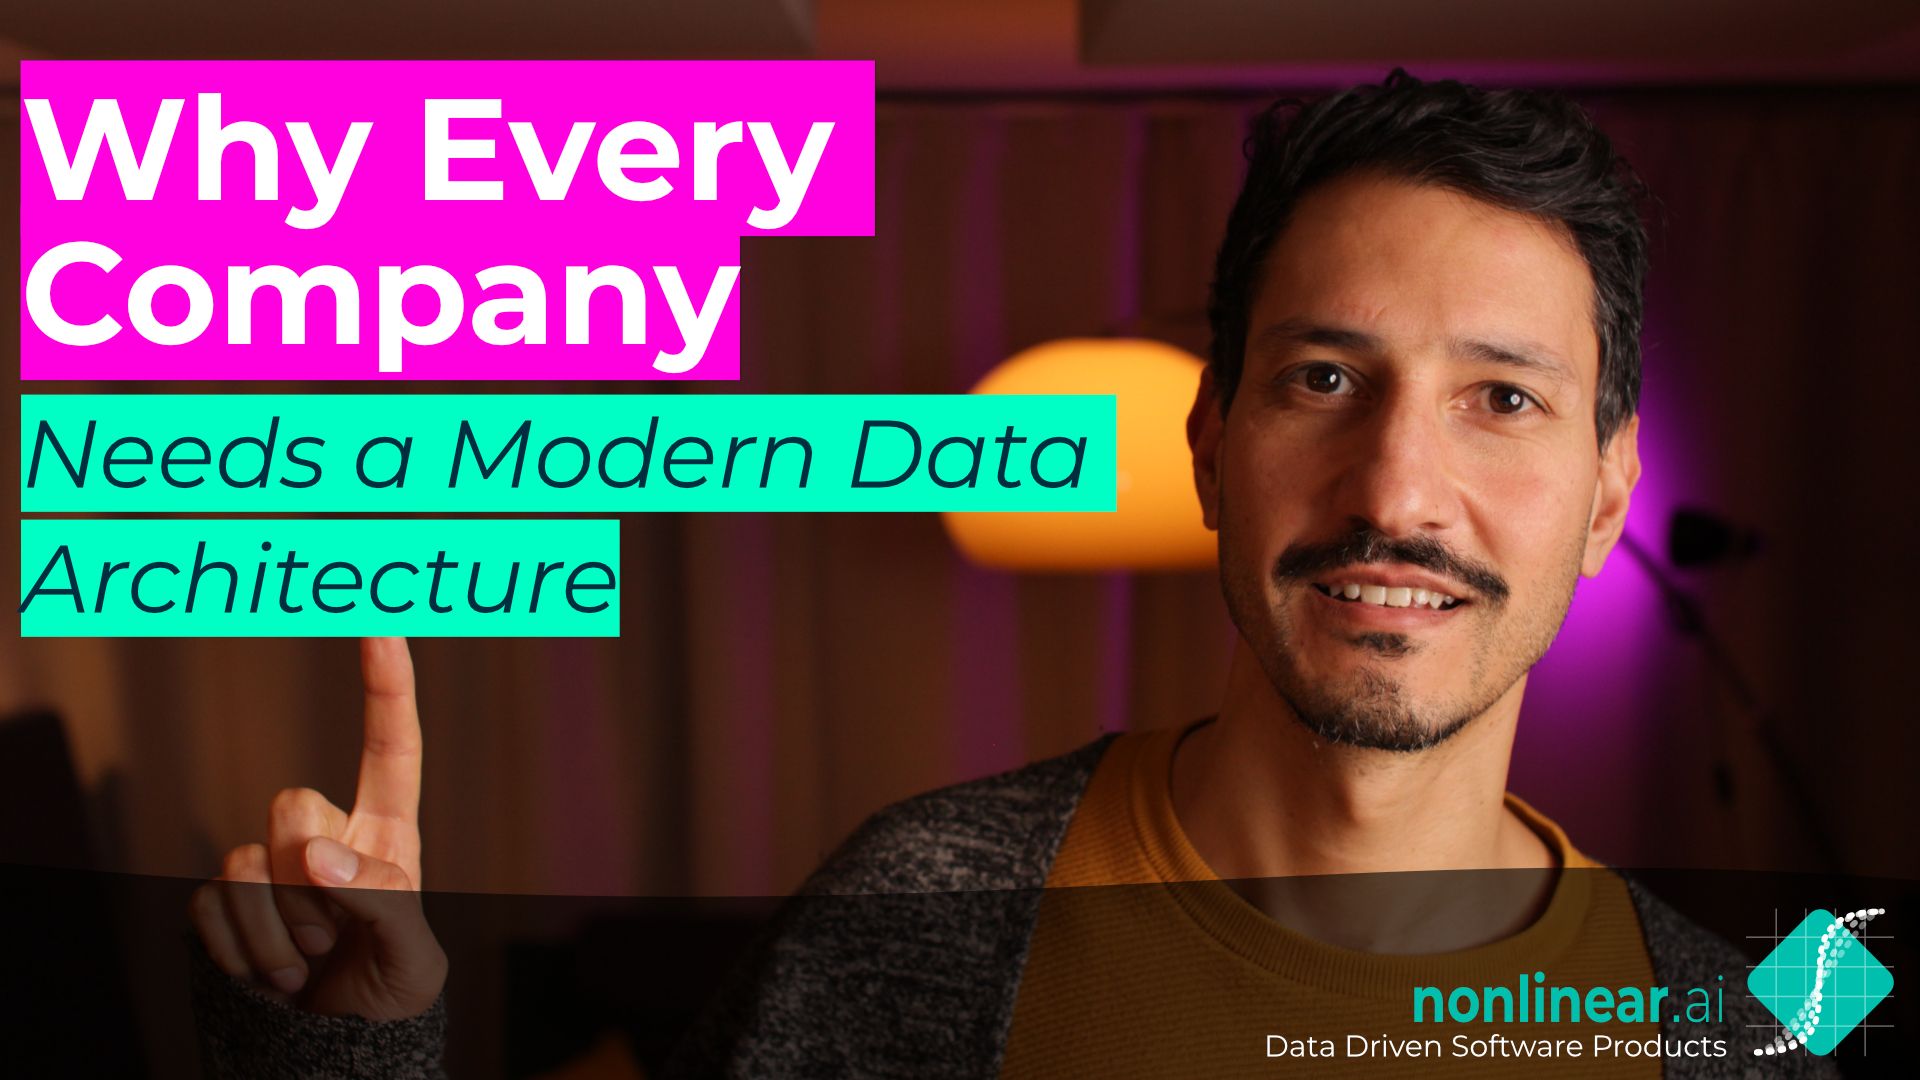 Every company needs a modern data architecture